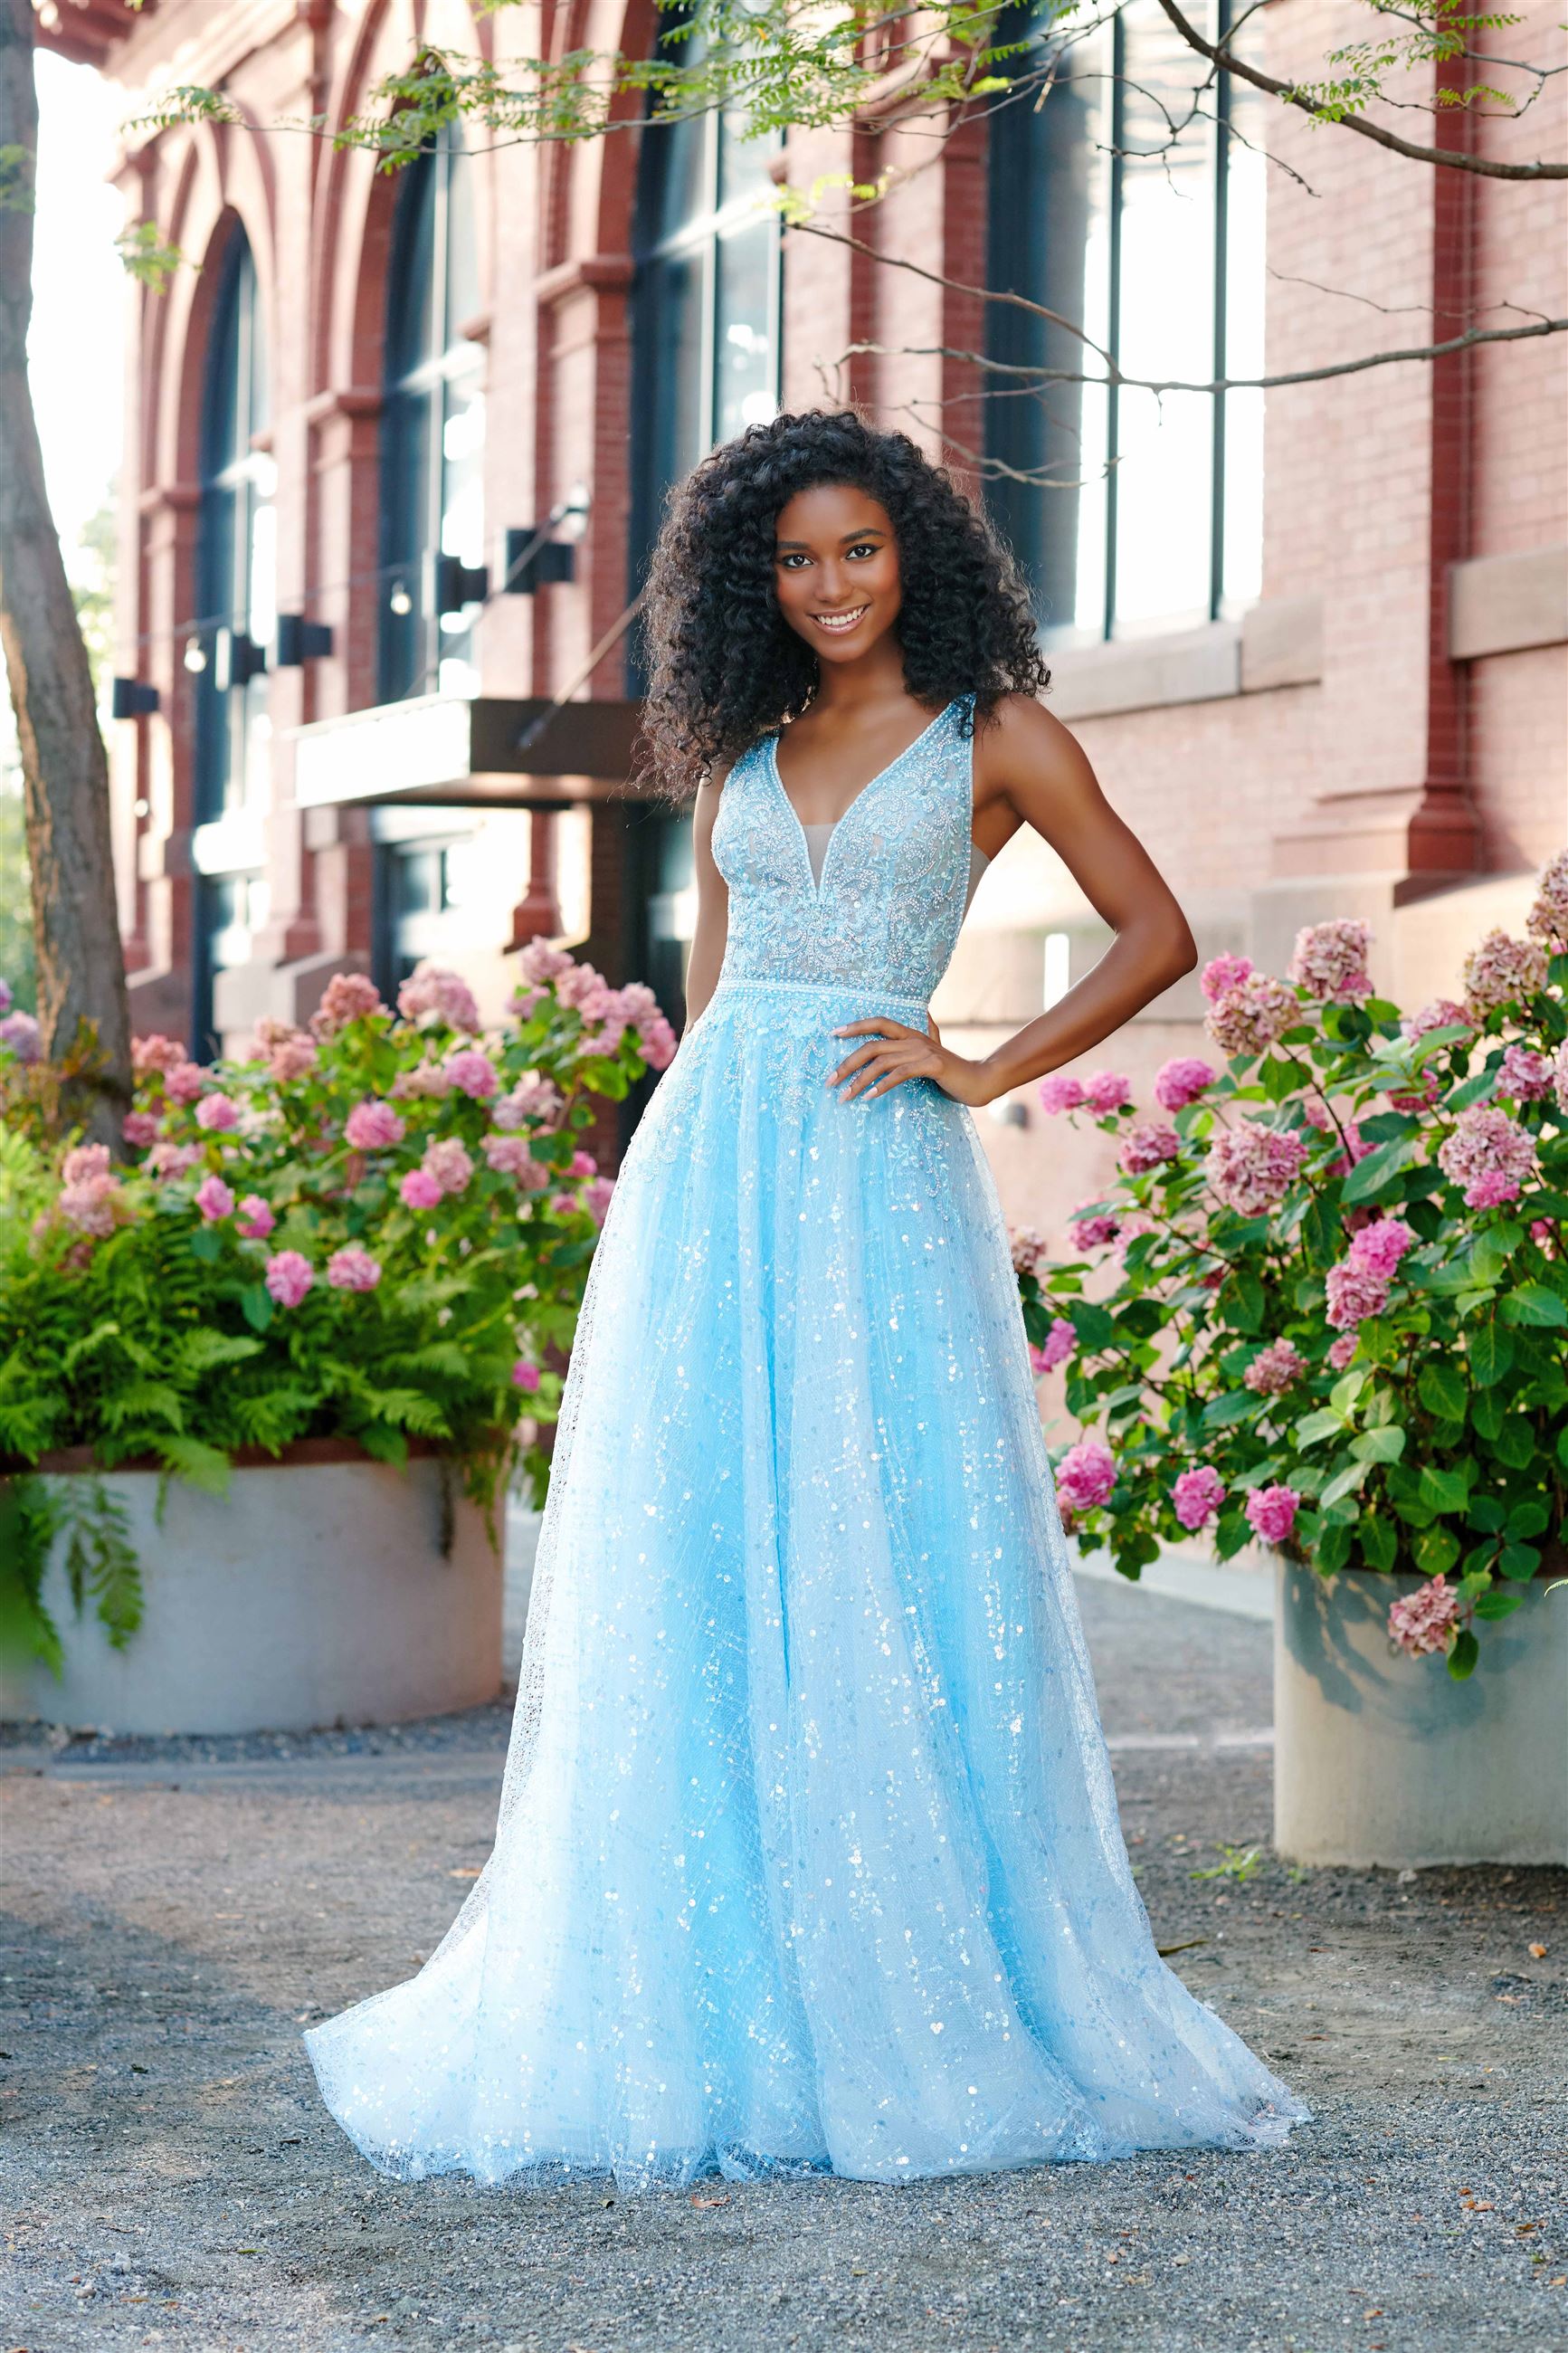 Girl wearing sparkly blue prom dress by Ellie Wilde